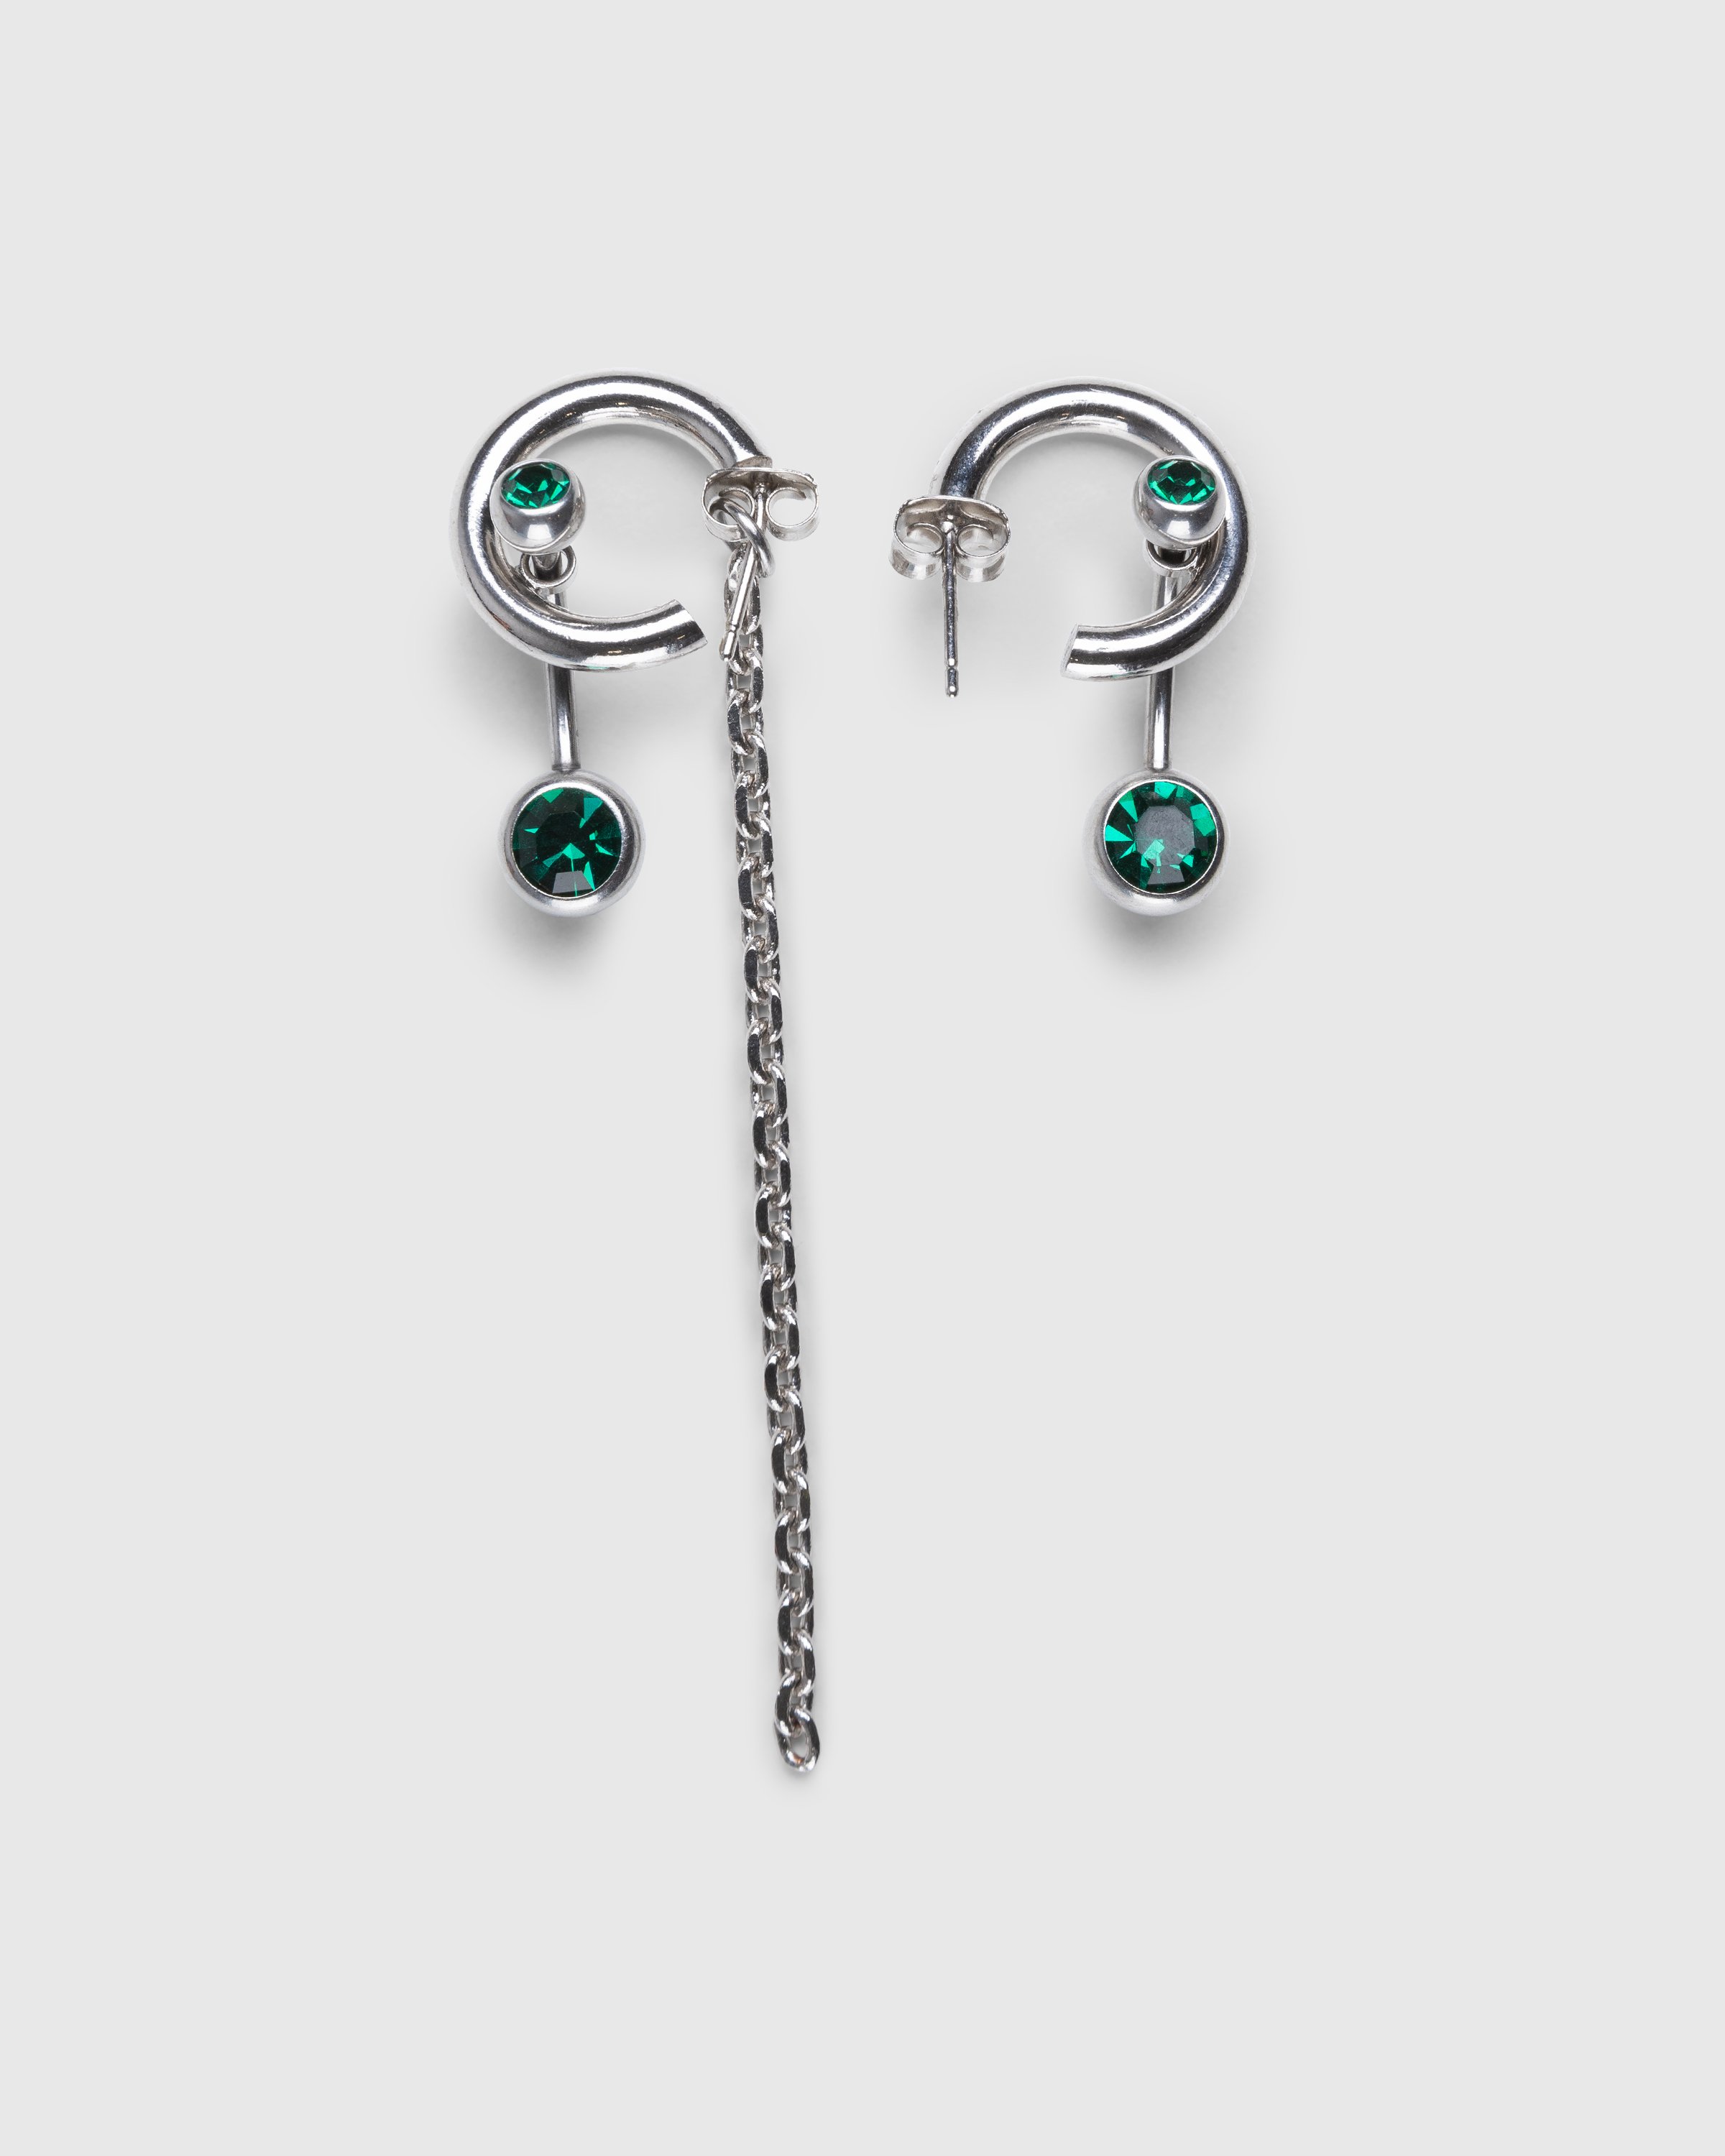 Justine Clenquet x Highsnobiety - Bless Earrings - Accessories - Silver - Image 1